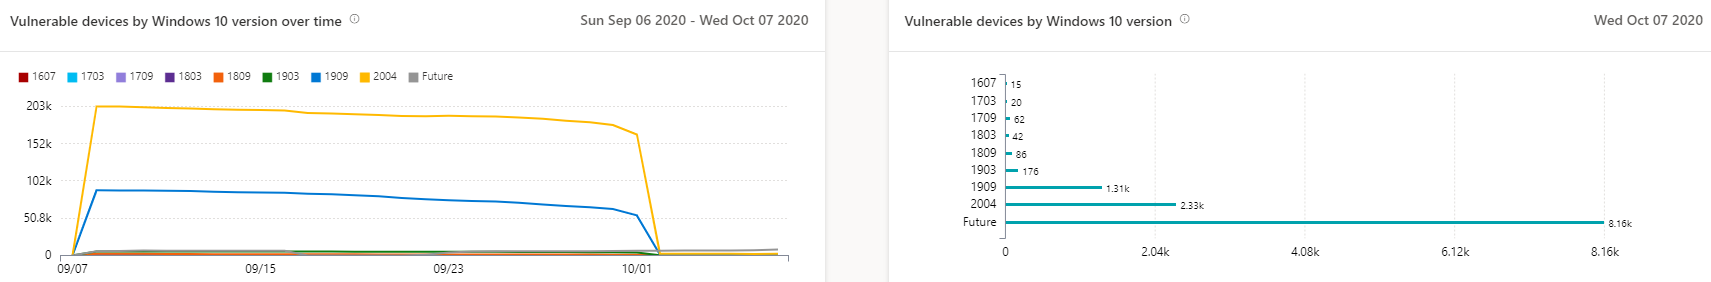 One graph of current vulnerable devices by Windows 10 version, and one graph showing vulnerable devices by Windows 10 version over time.